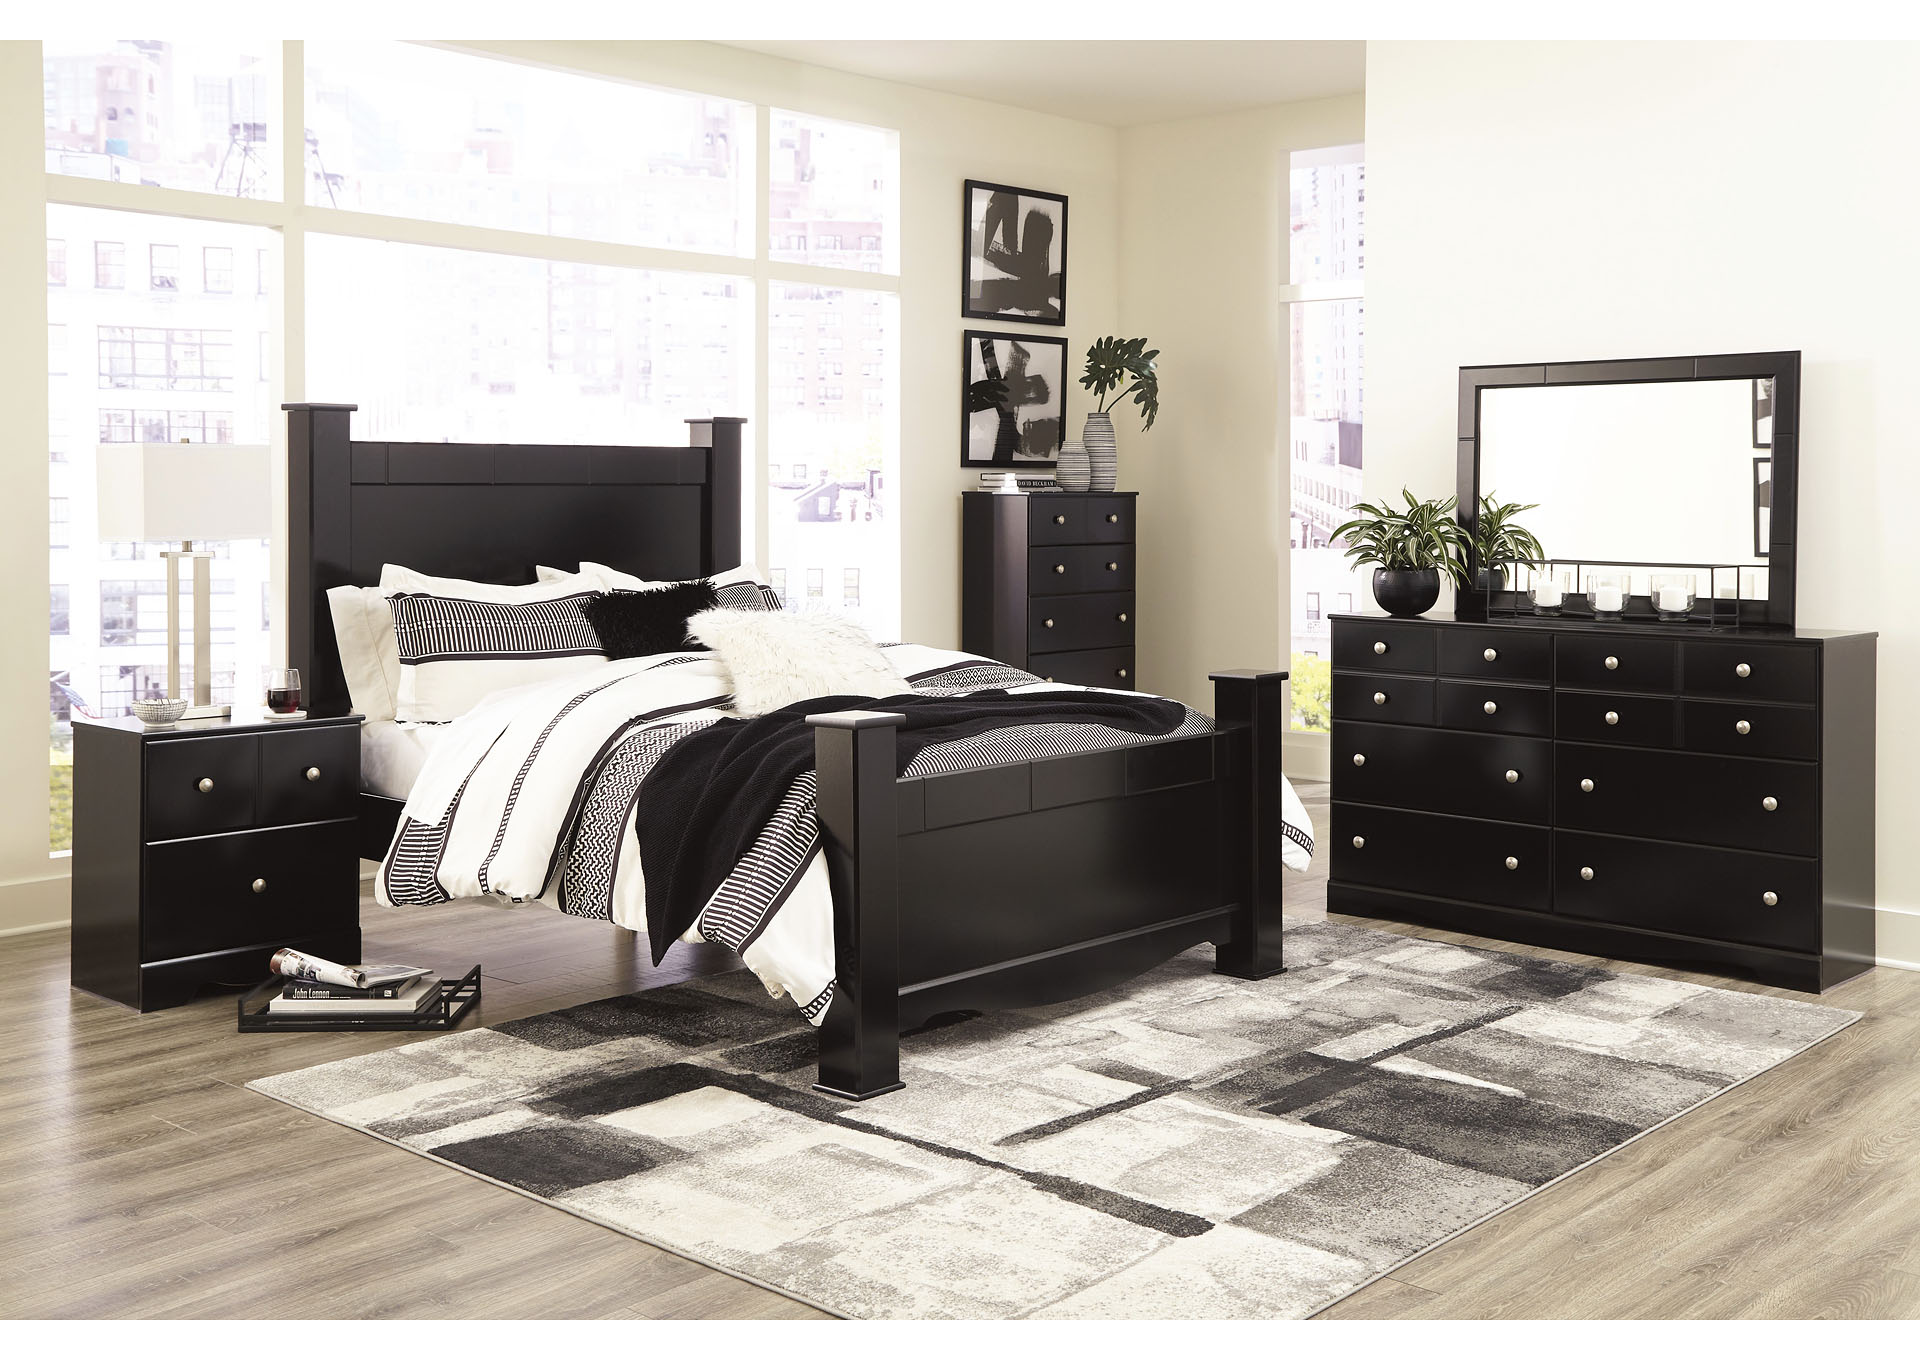 Mirlotown Queen Poster Bed w/ Chest, Dresser & Mirror,In-Store Product